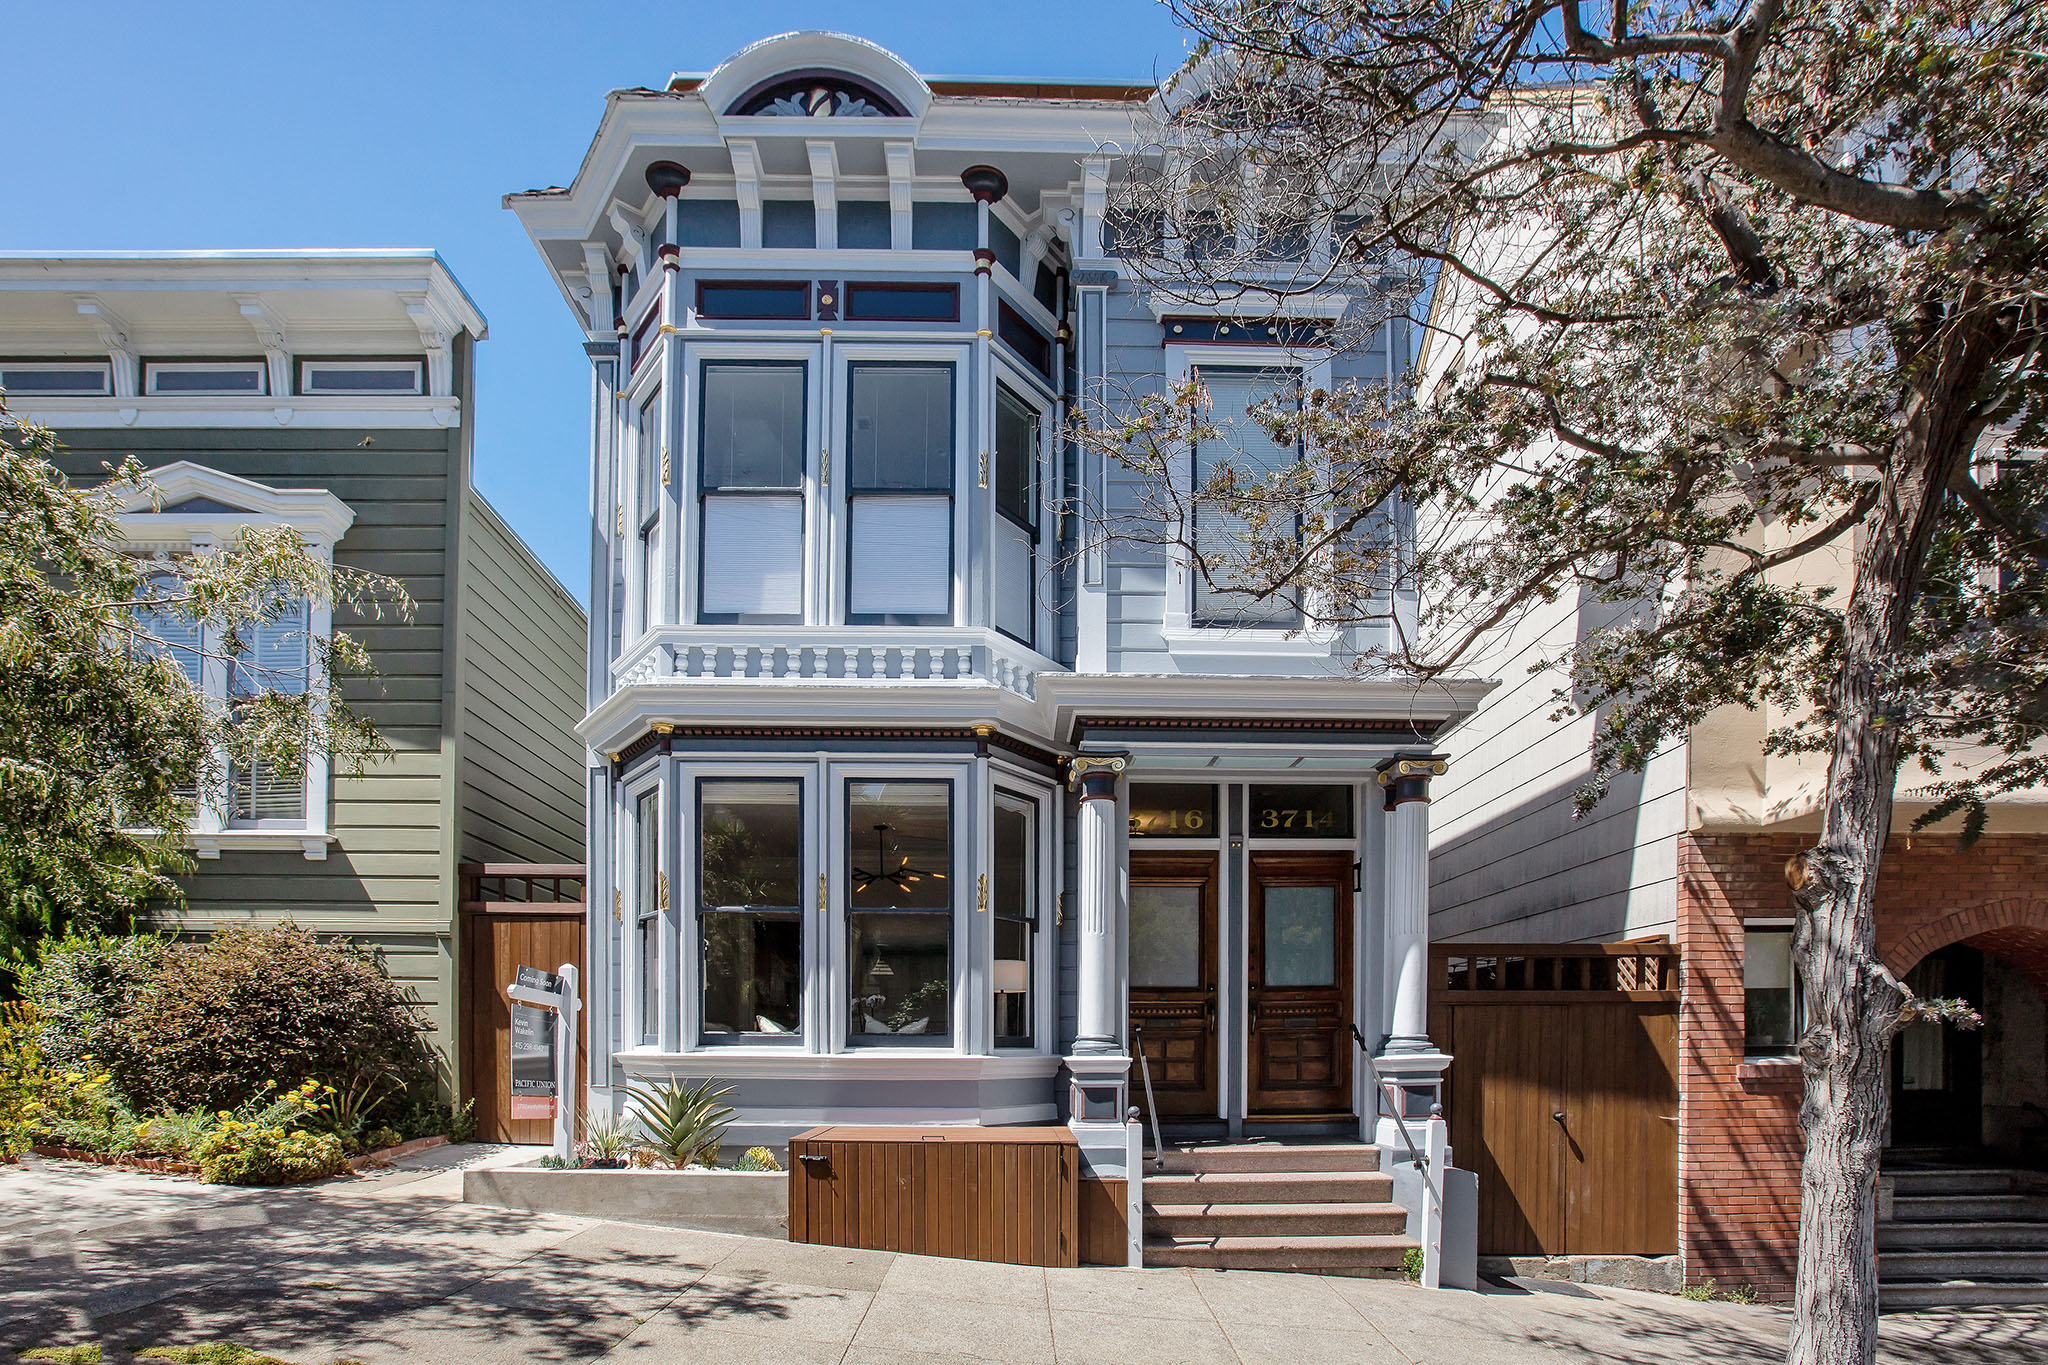 Feature photo for 3716 23rd Street, San Francisco